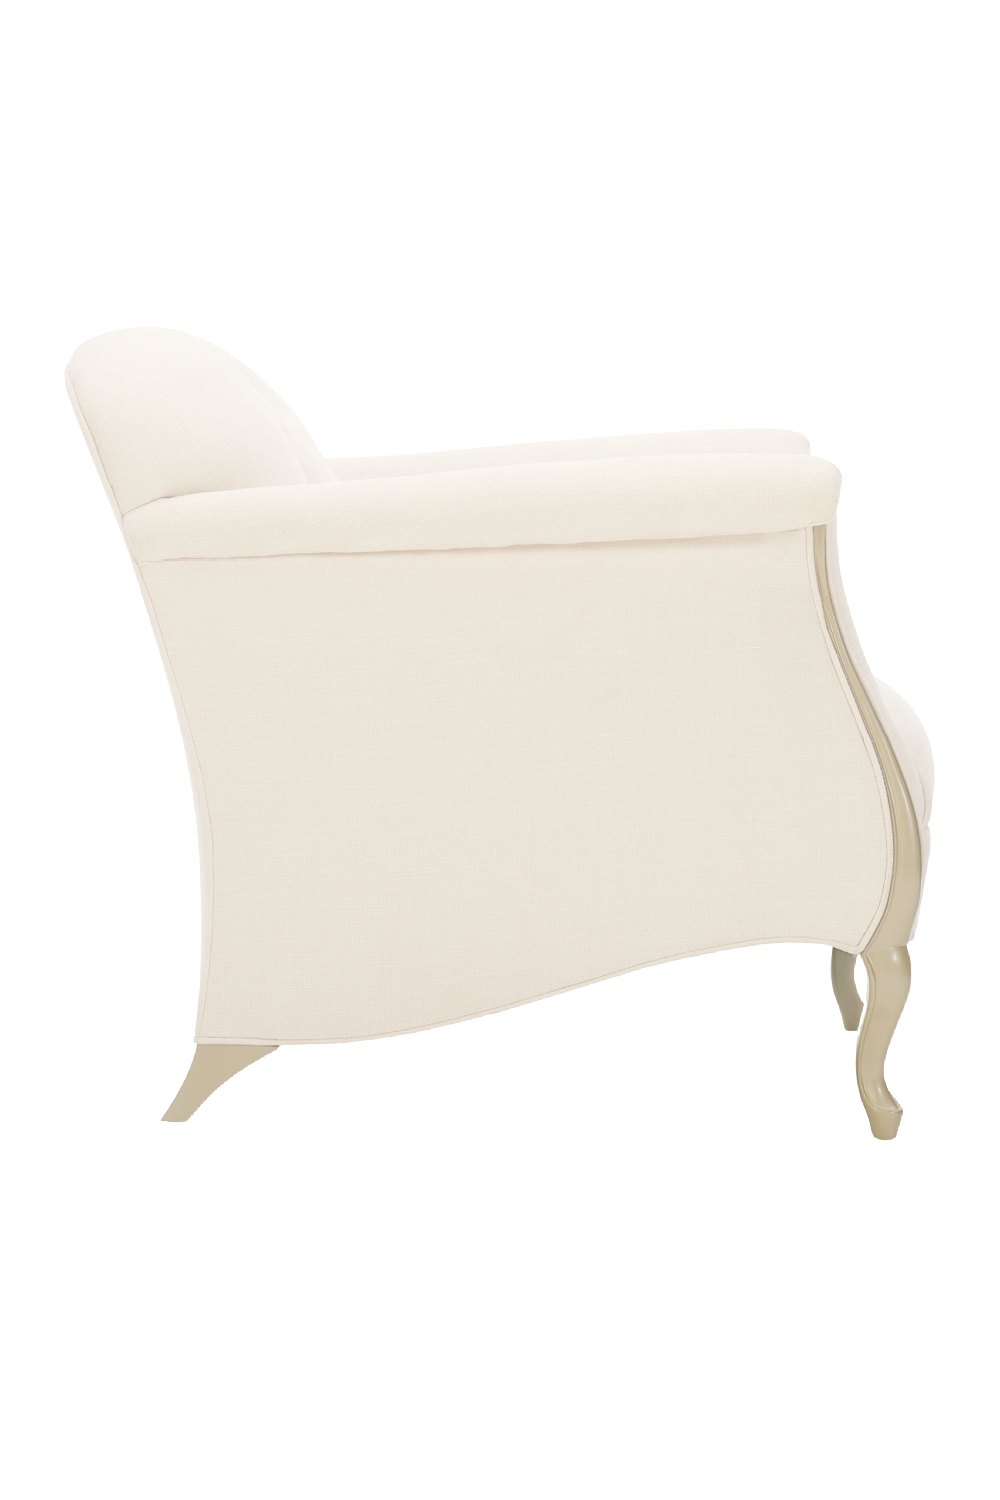 Scrolled Arms Accent Chair | Caracole Two To Tango | Oroa.com